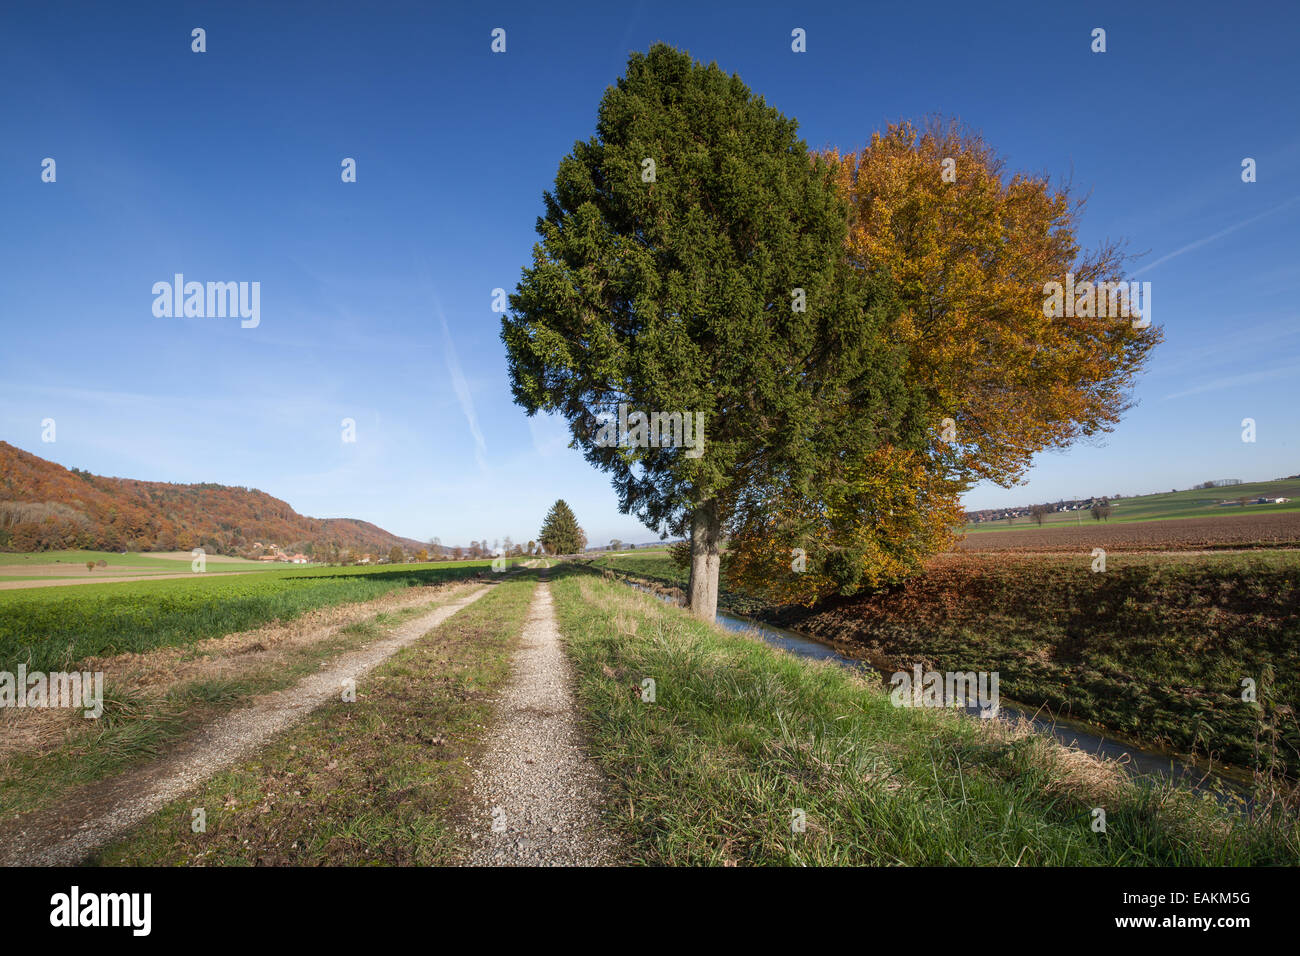 Pathway along the river with two colorful trees Stock Photo